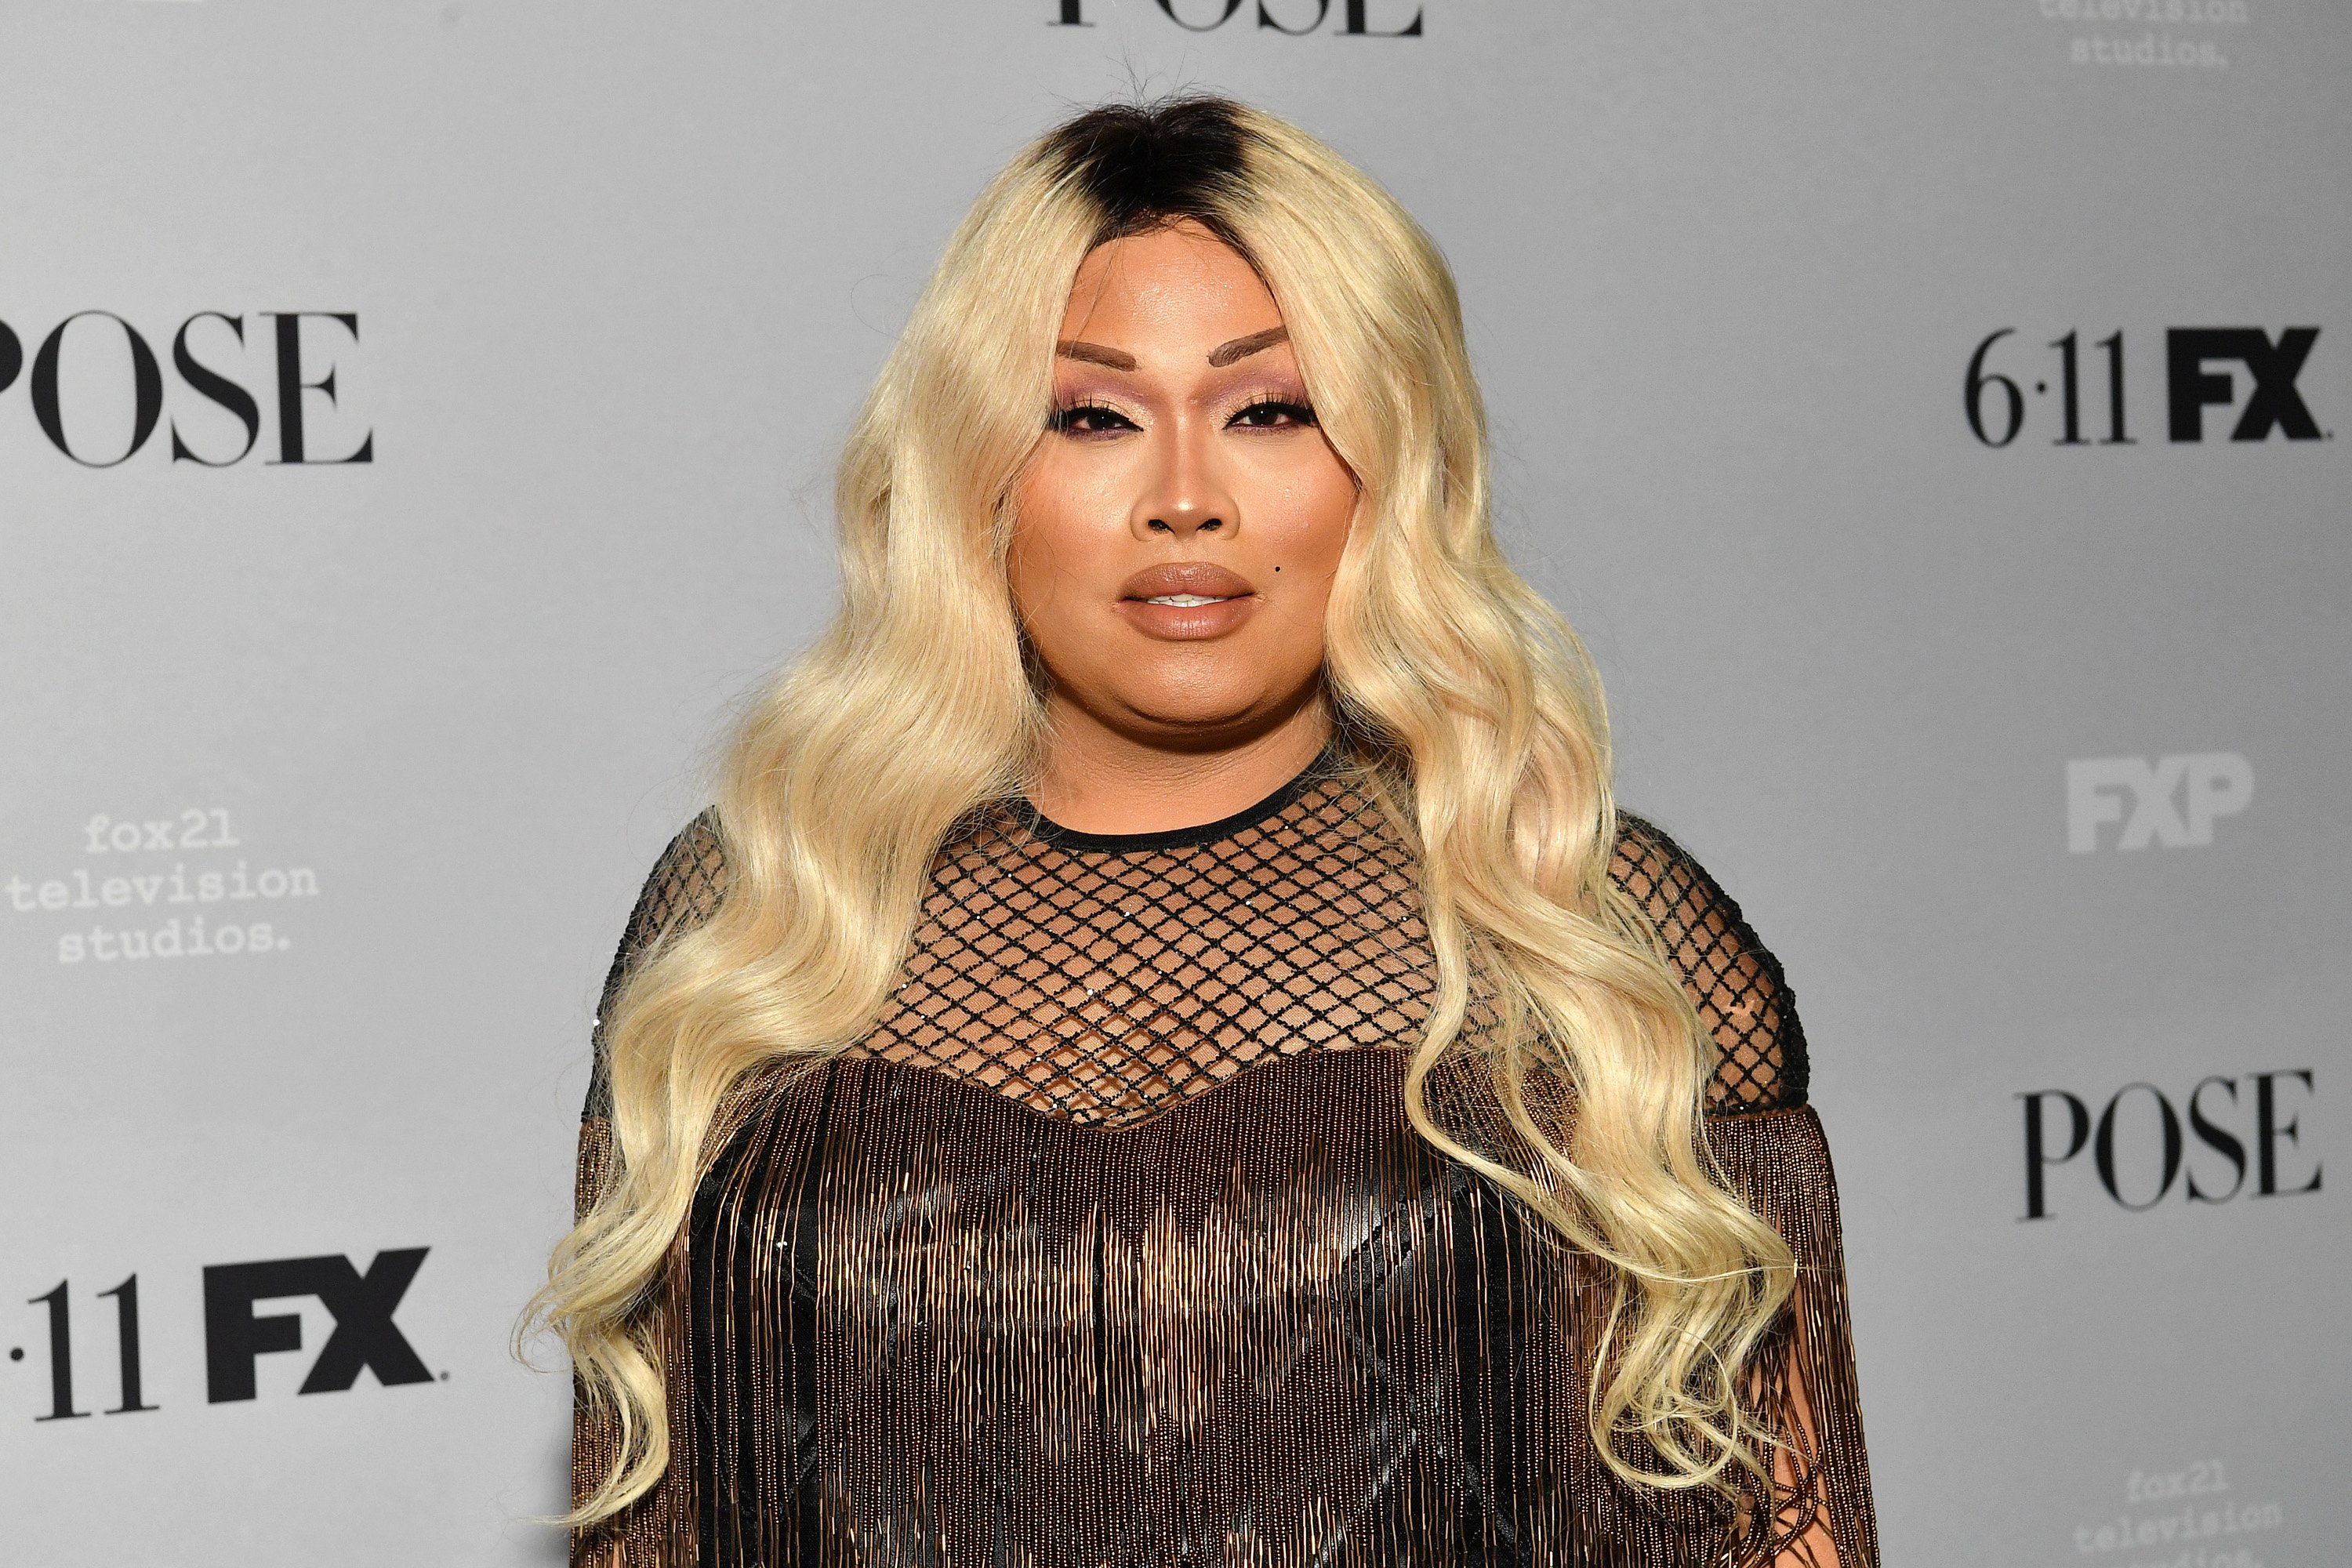 Bianca Castro attends FX Network's 'Pose' season 2 premiere with blonde hair